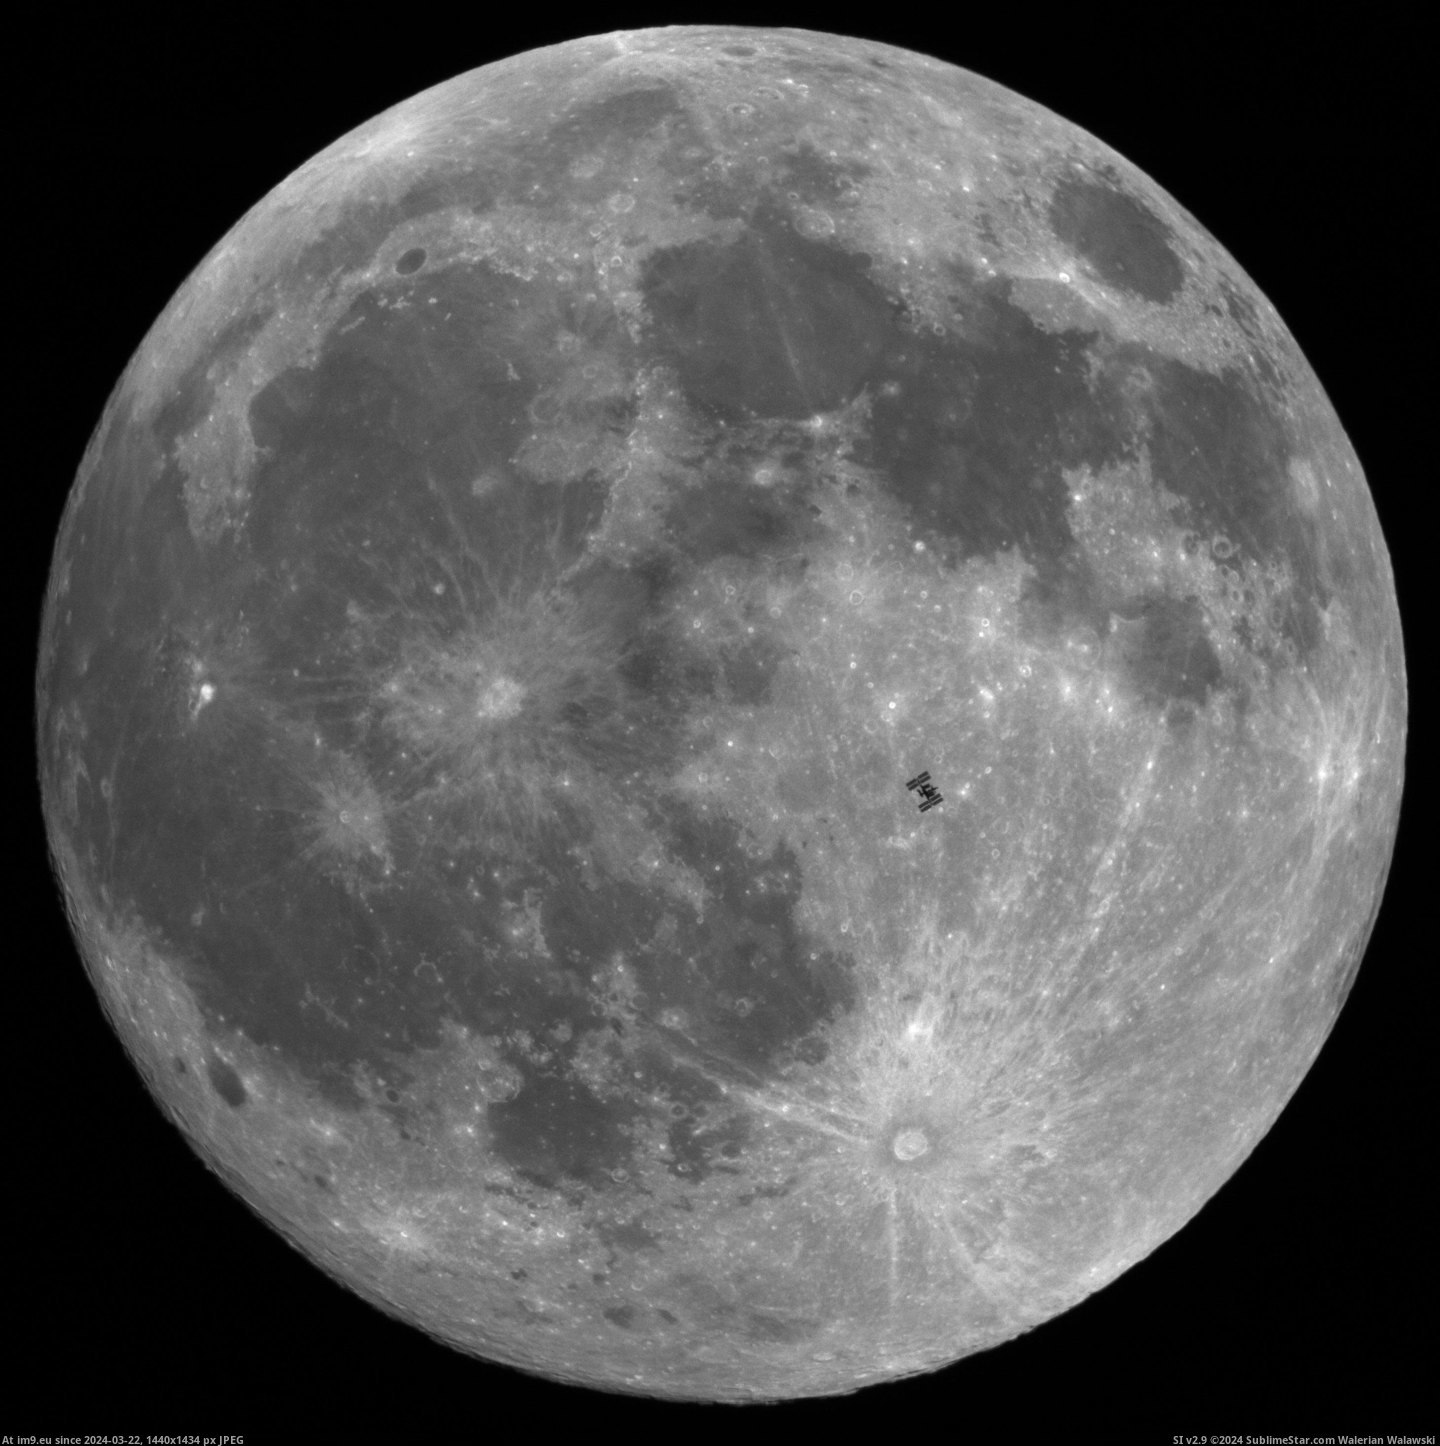 [Pics] The International Space Station in front of the full moon. (in My r/PICS favs)